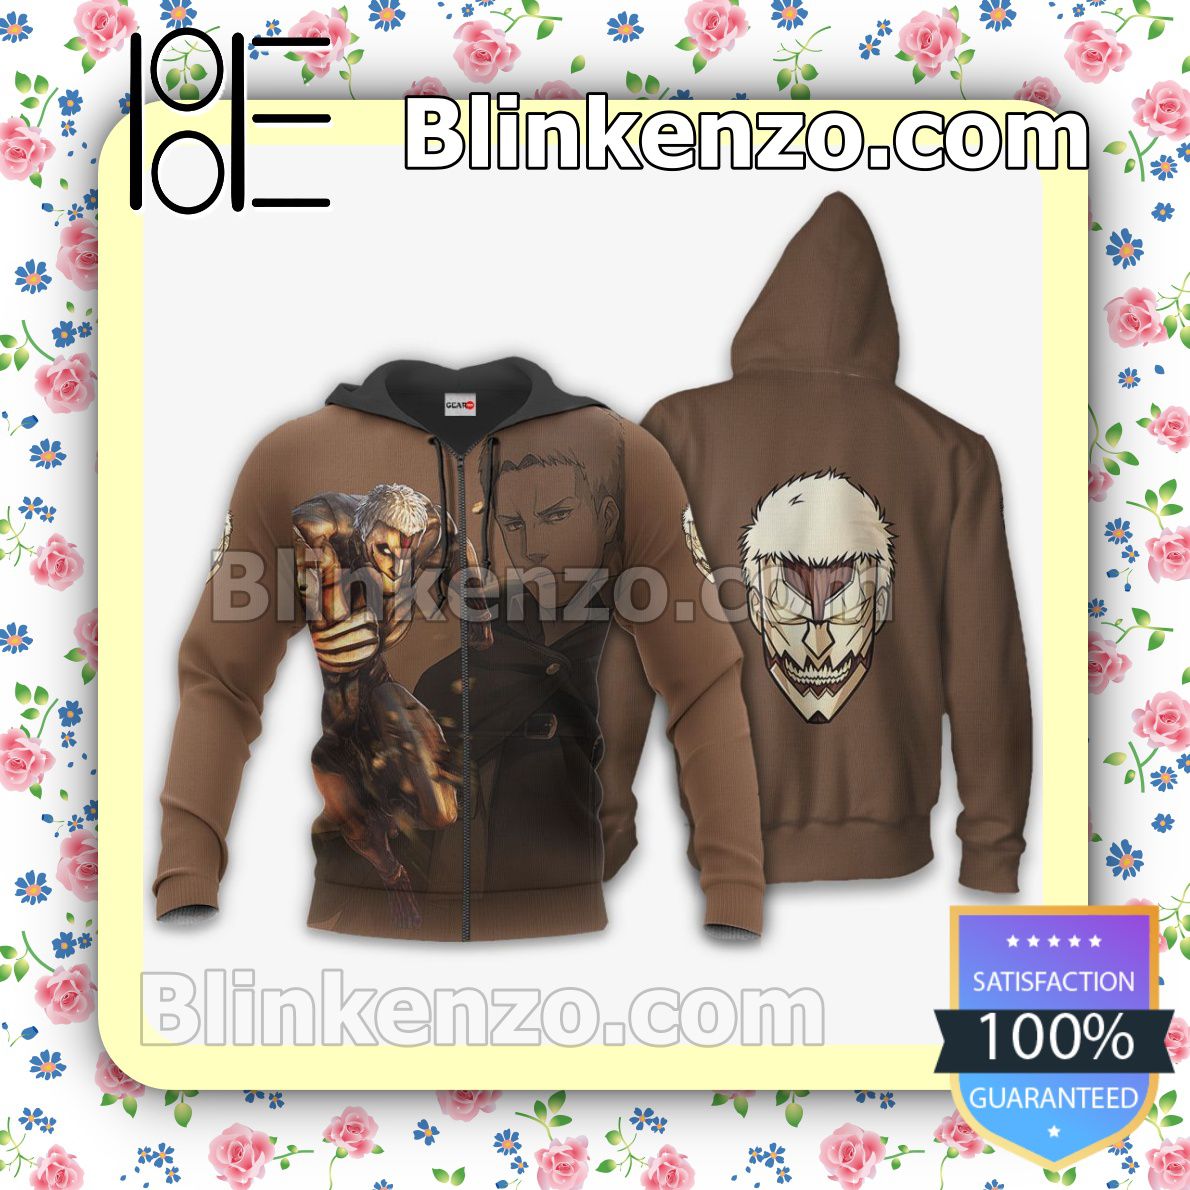 AOT Armored Titan Attack On Titan Anime Personalized T-shirt, Hoodie, Long Sleeve, Bomber Jacket